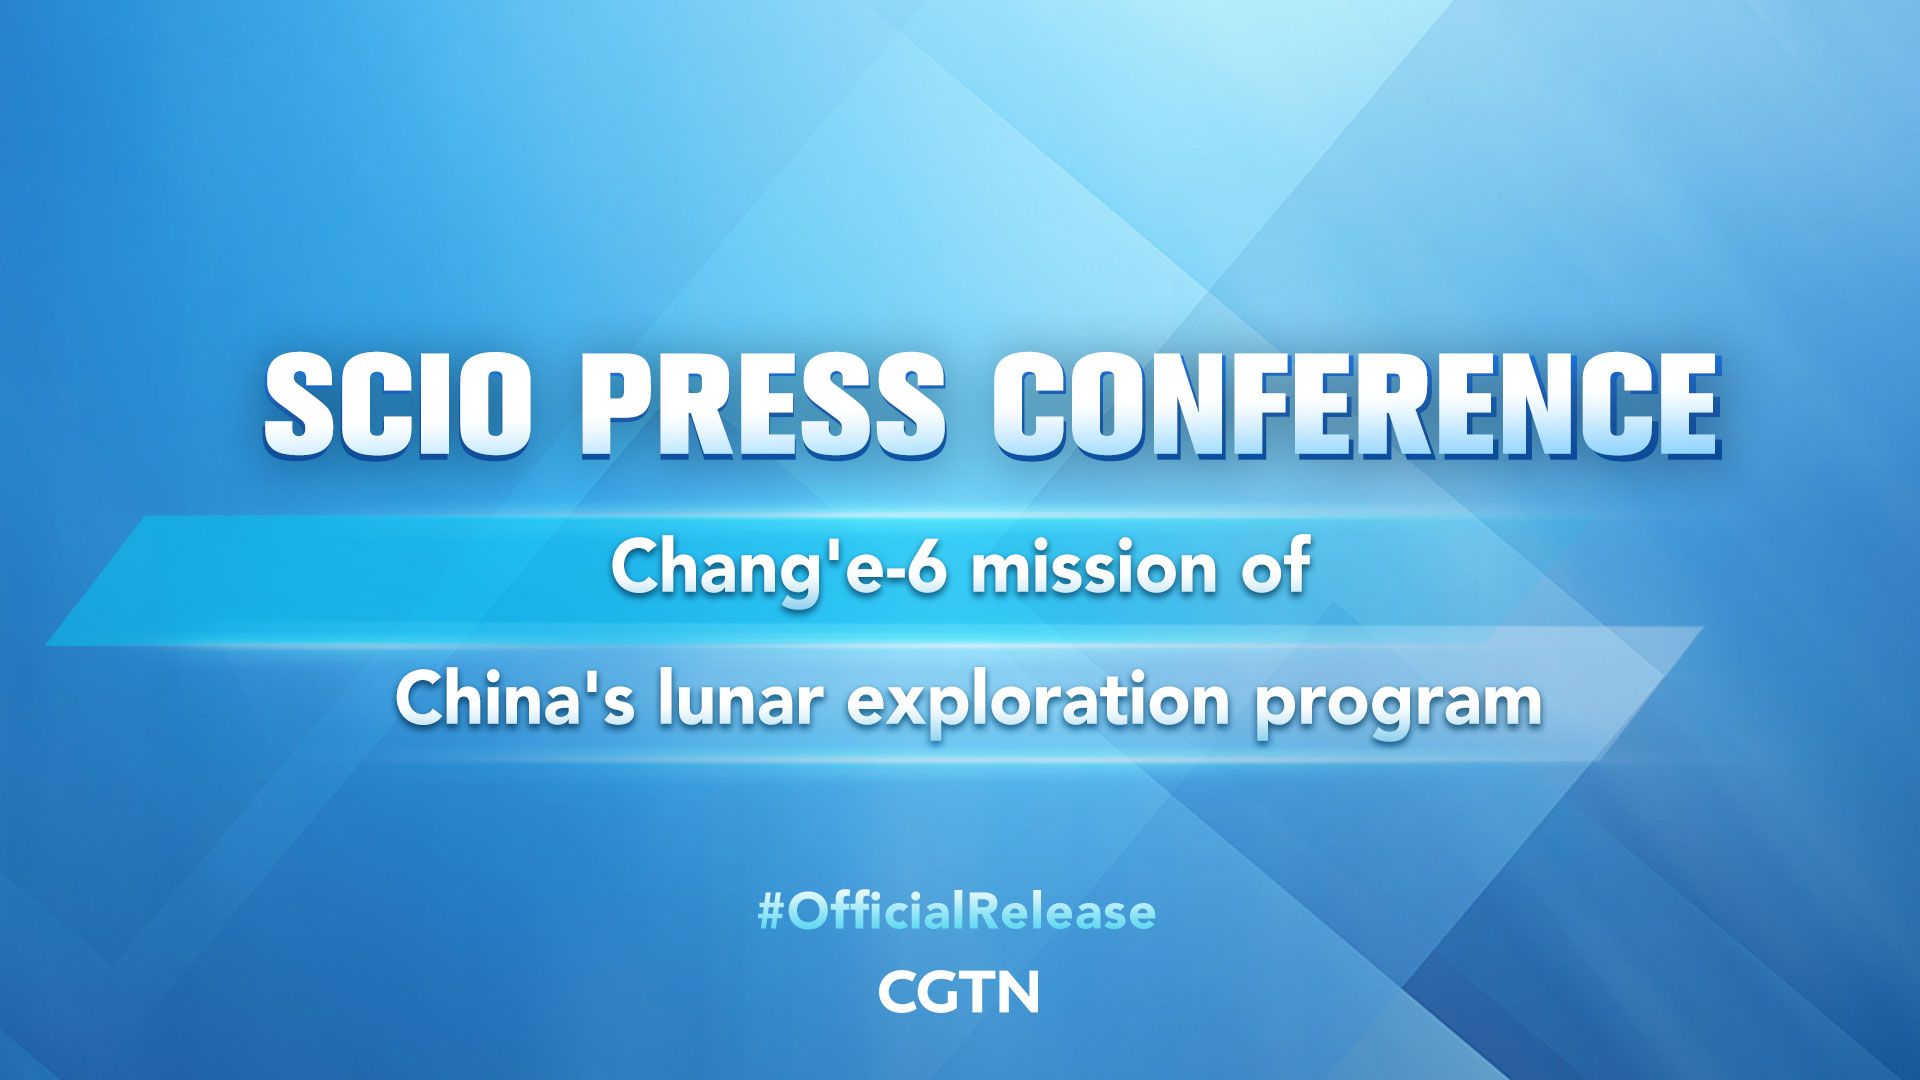 Live: Press conference on Chang'e-6 mission of China's lunar exploration program